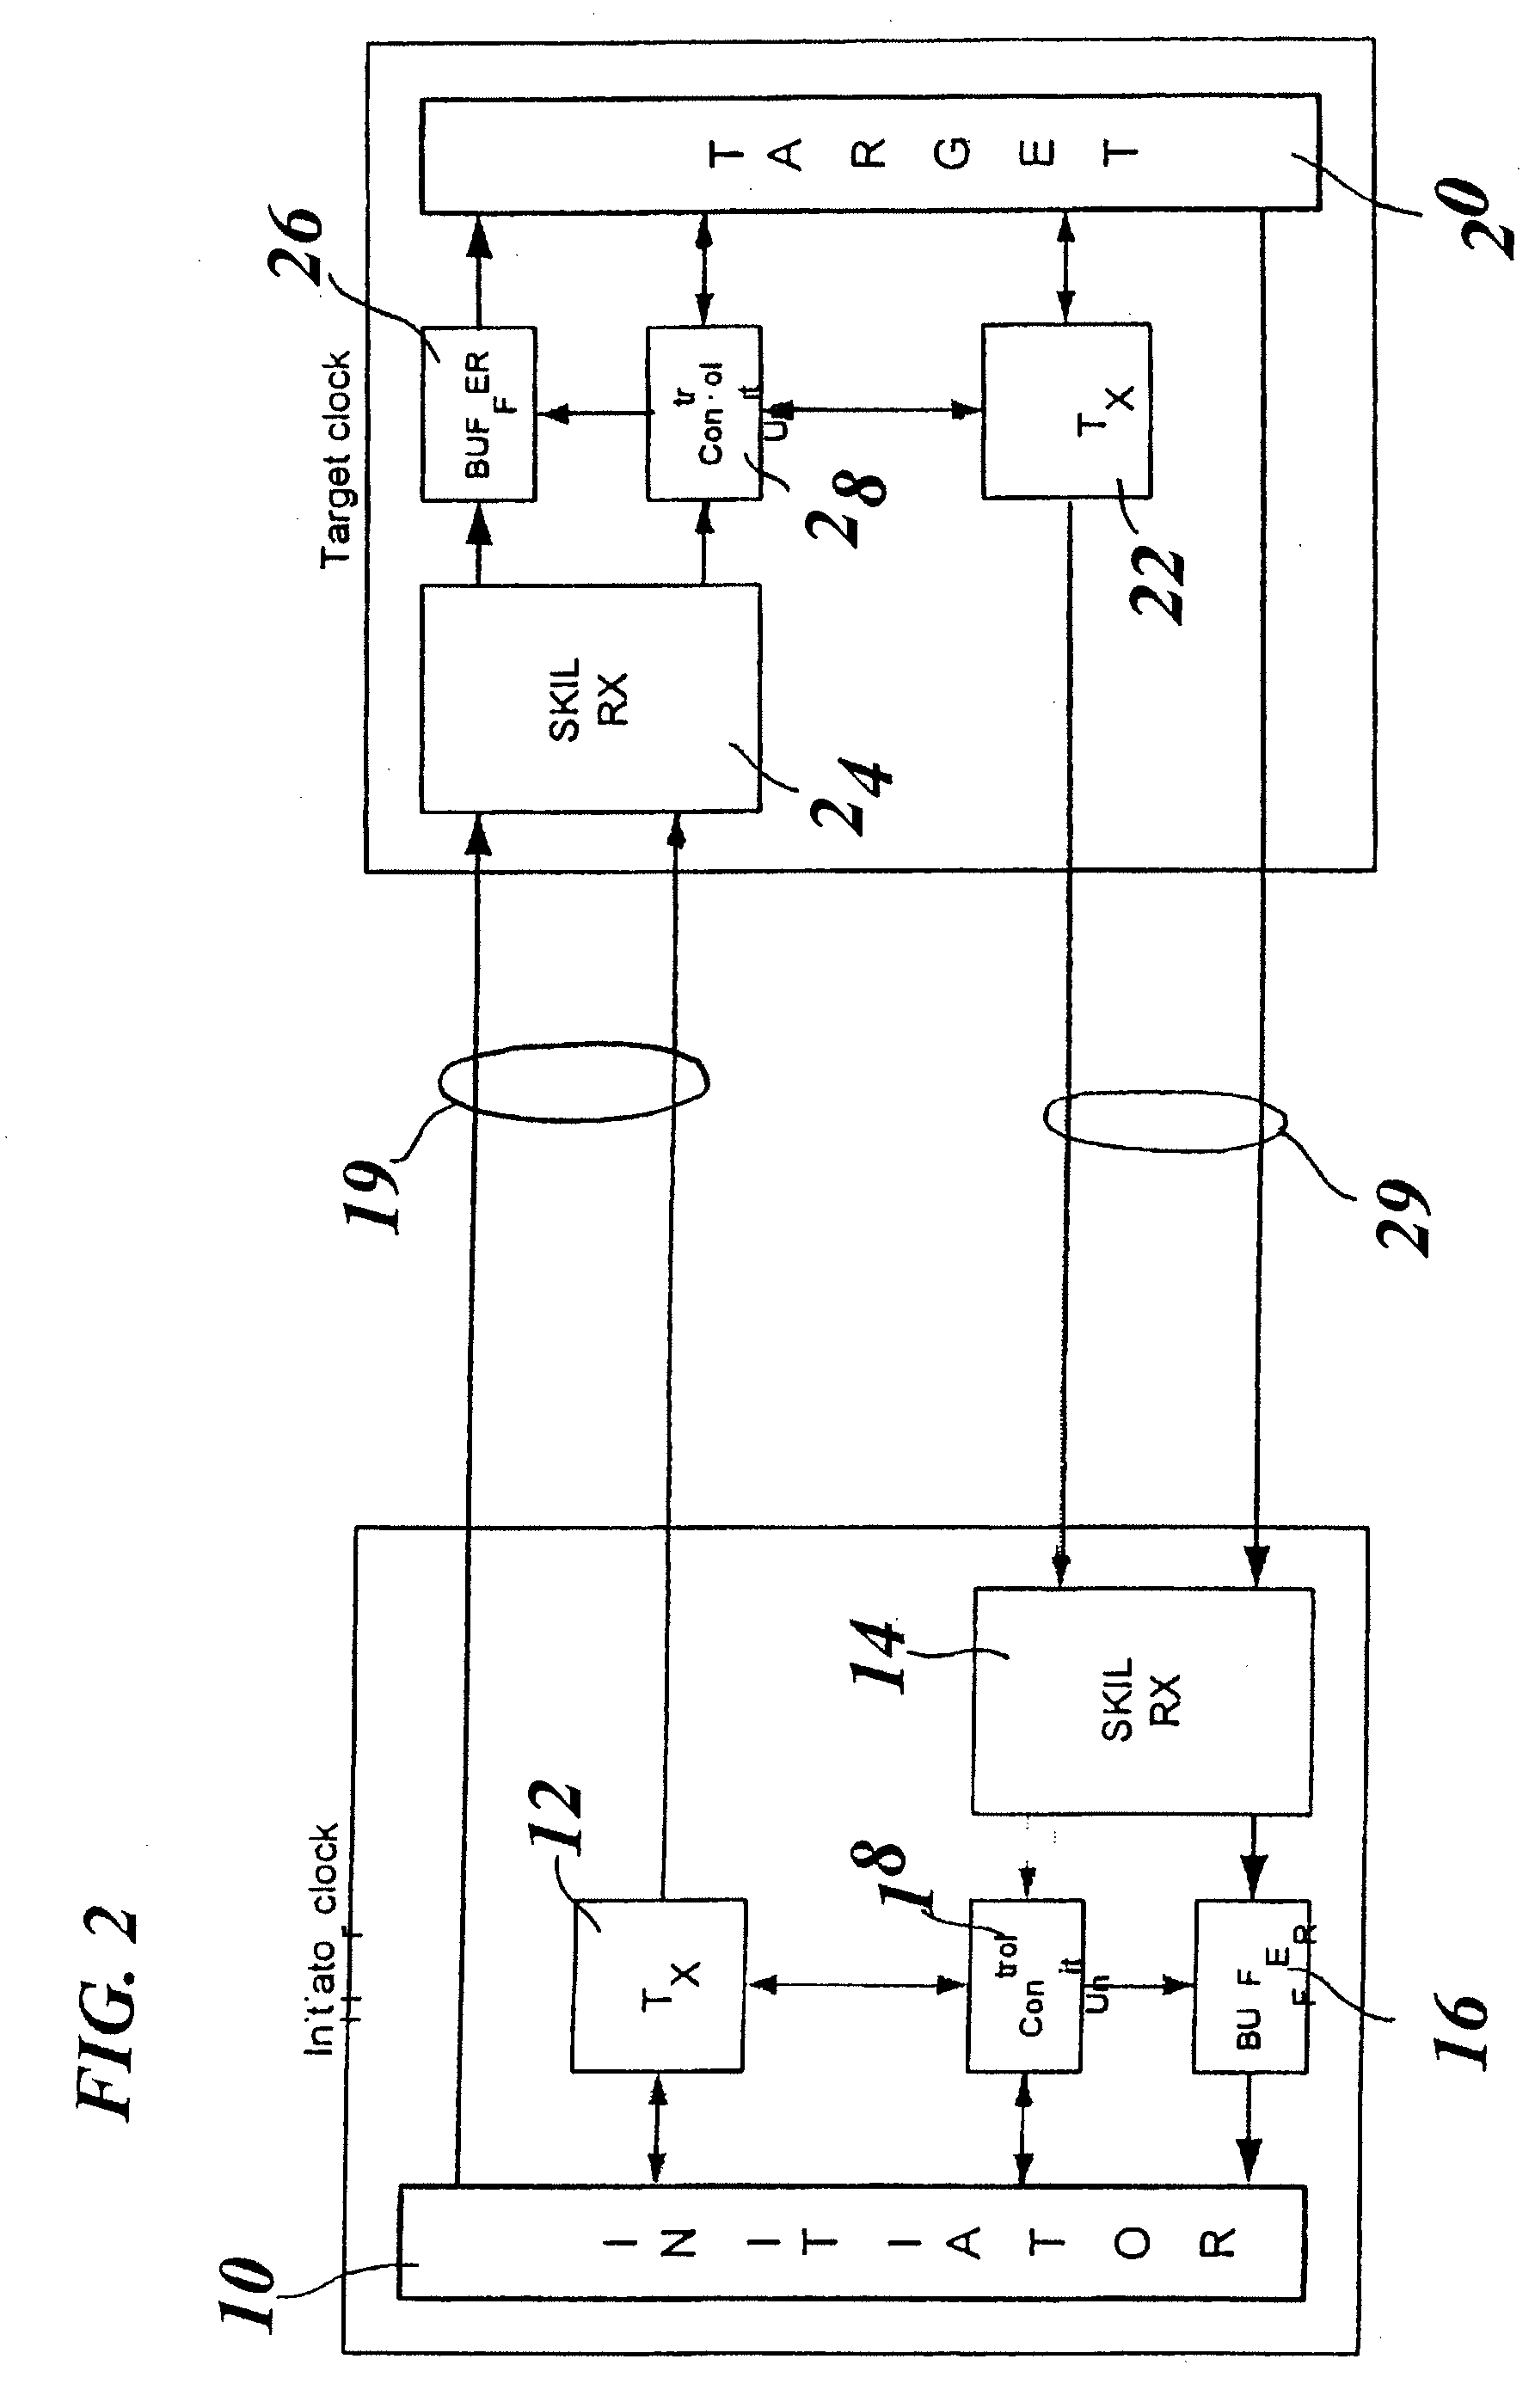 Method and system for full-duplex mesochronous communications and corresponding computer program product